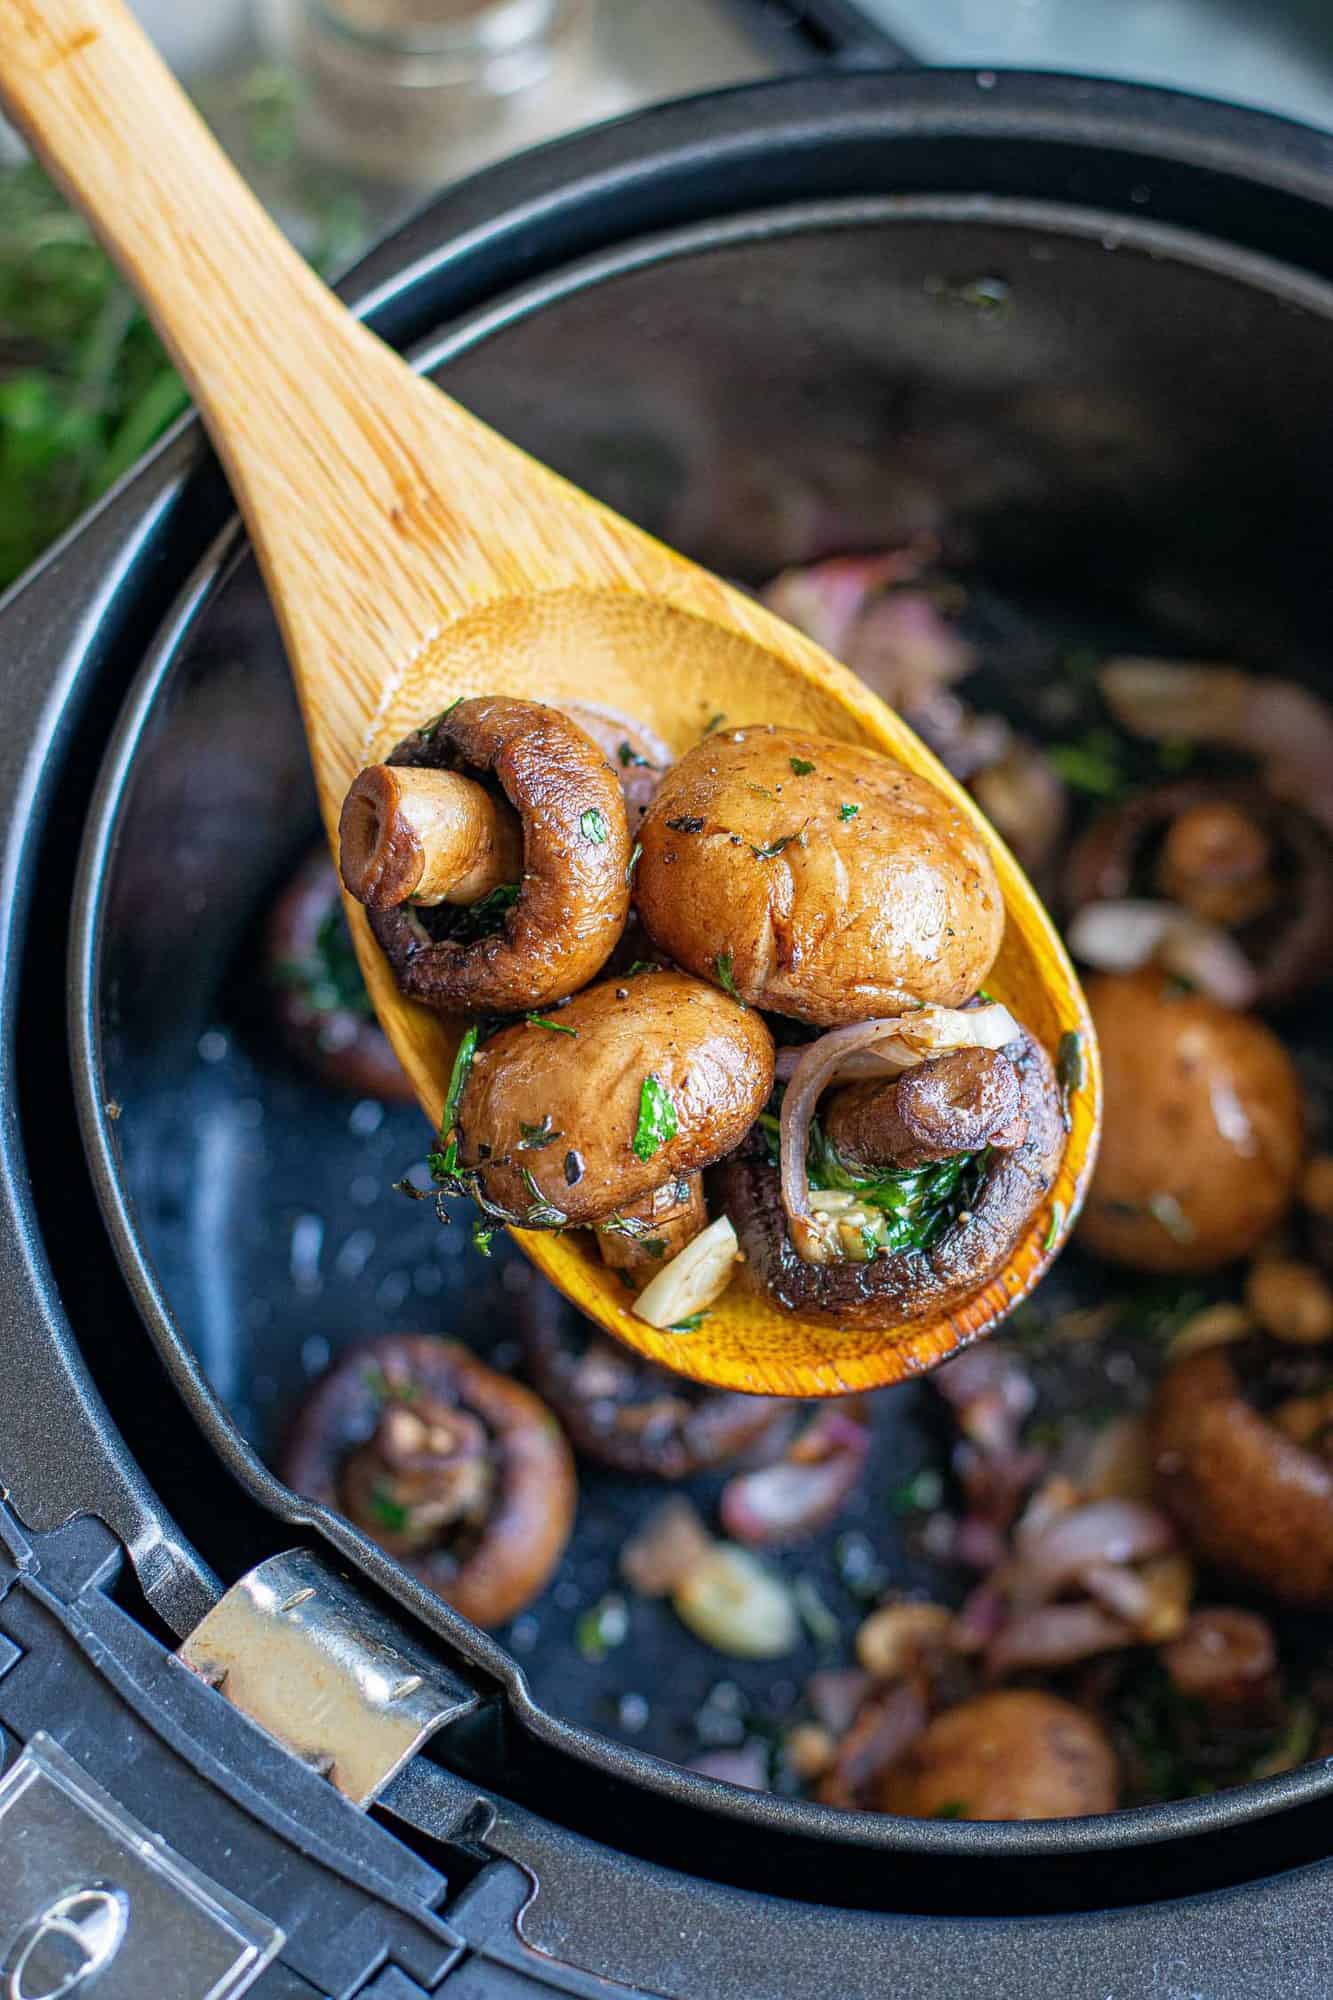 Cooked mushrooms being scooped out of an air fryer with a wooden spoon.